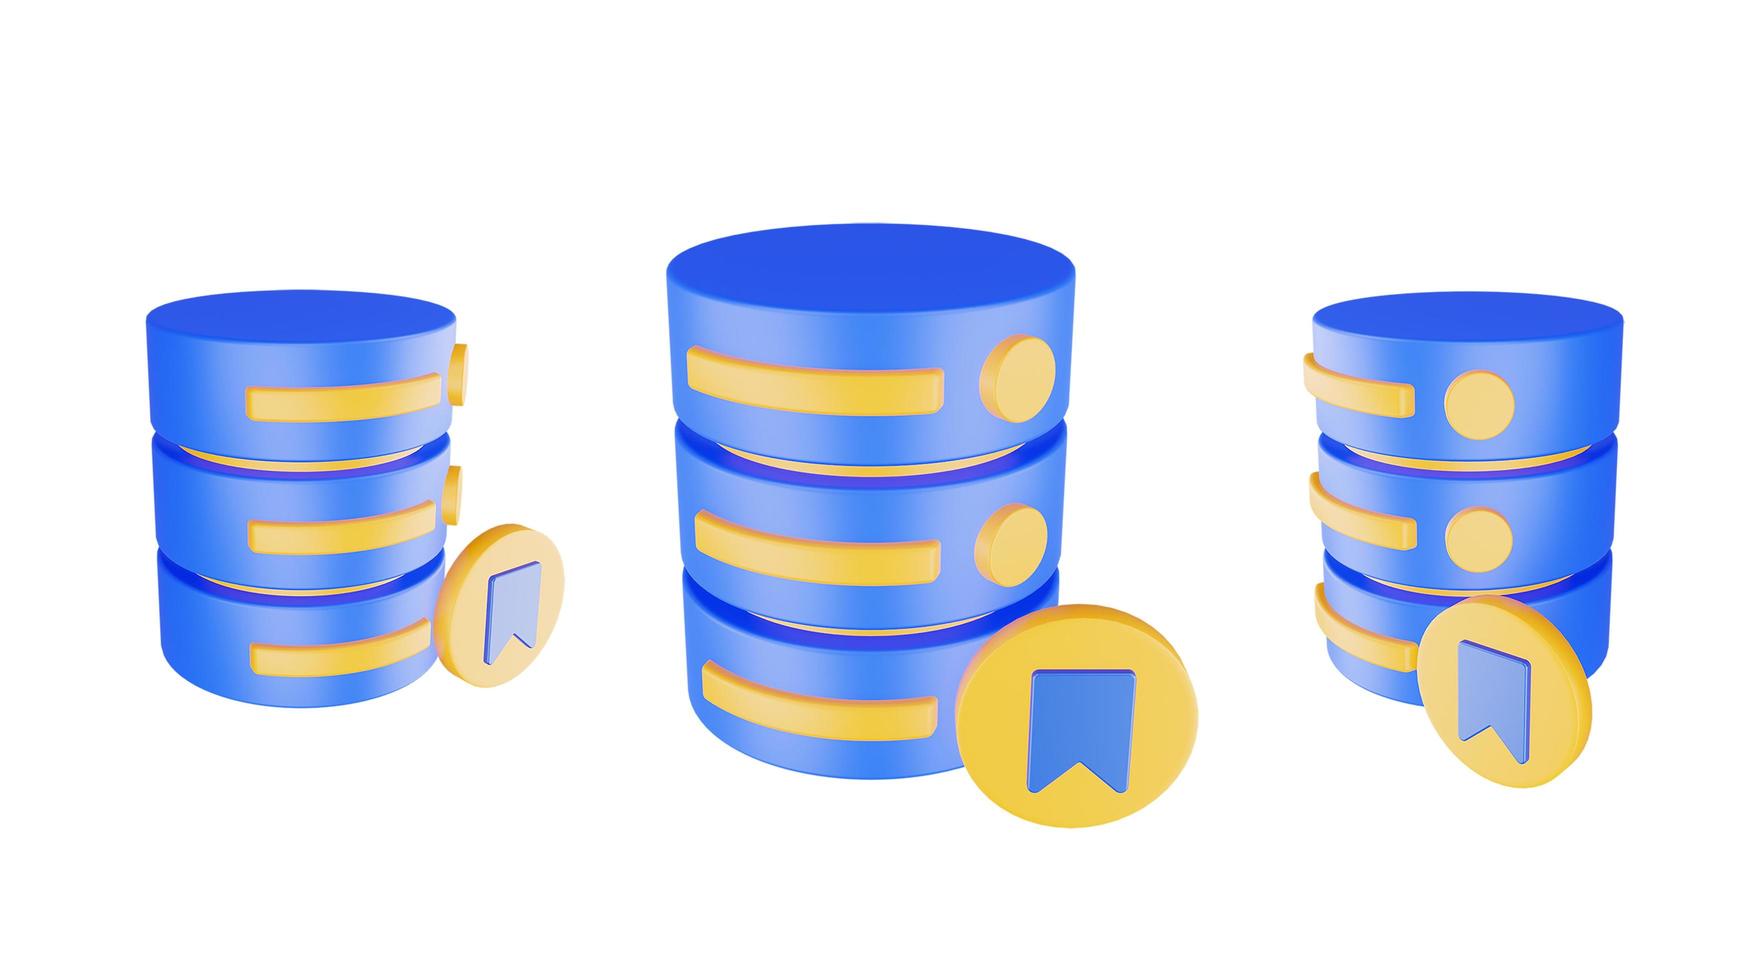 3d render database server icon with archieve icon isolated photo